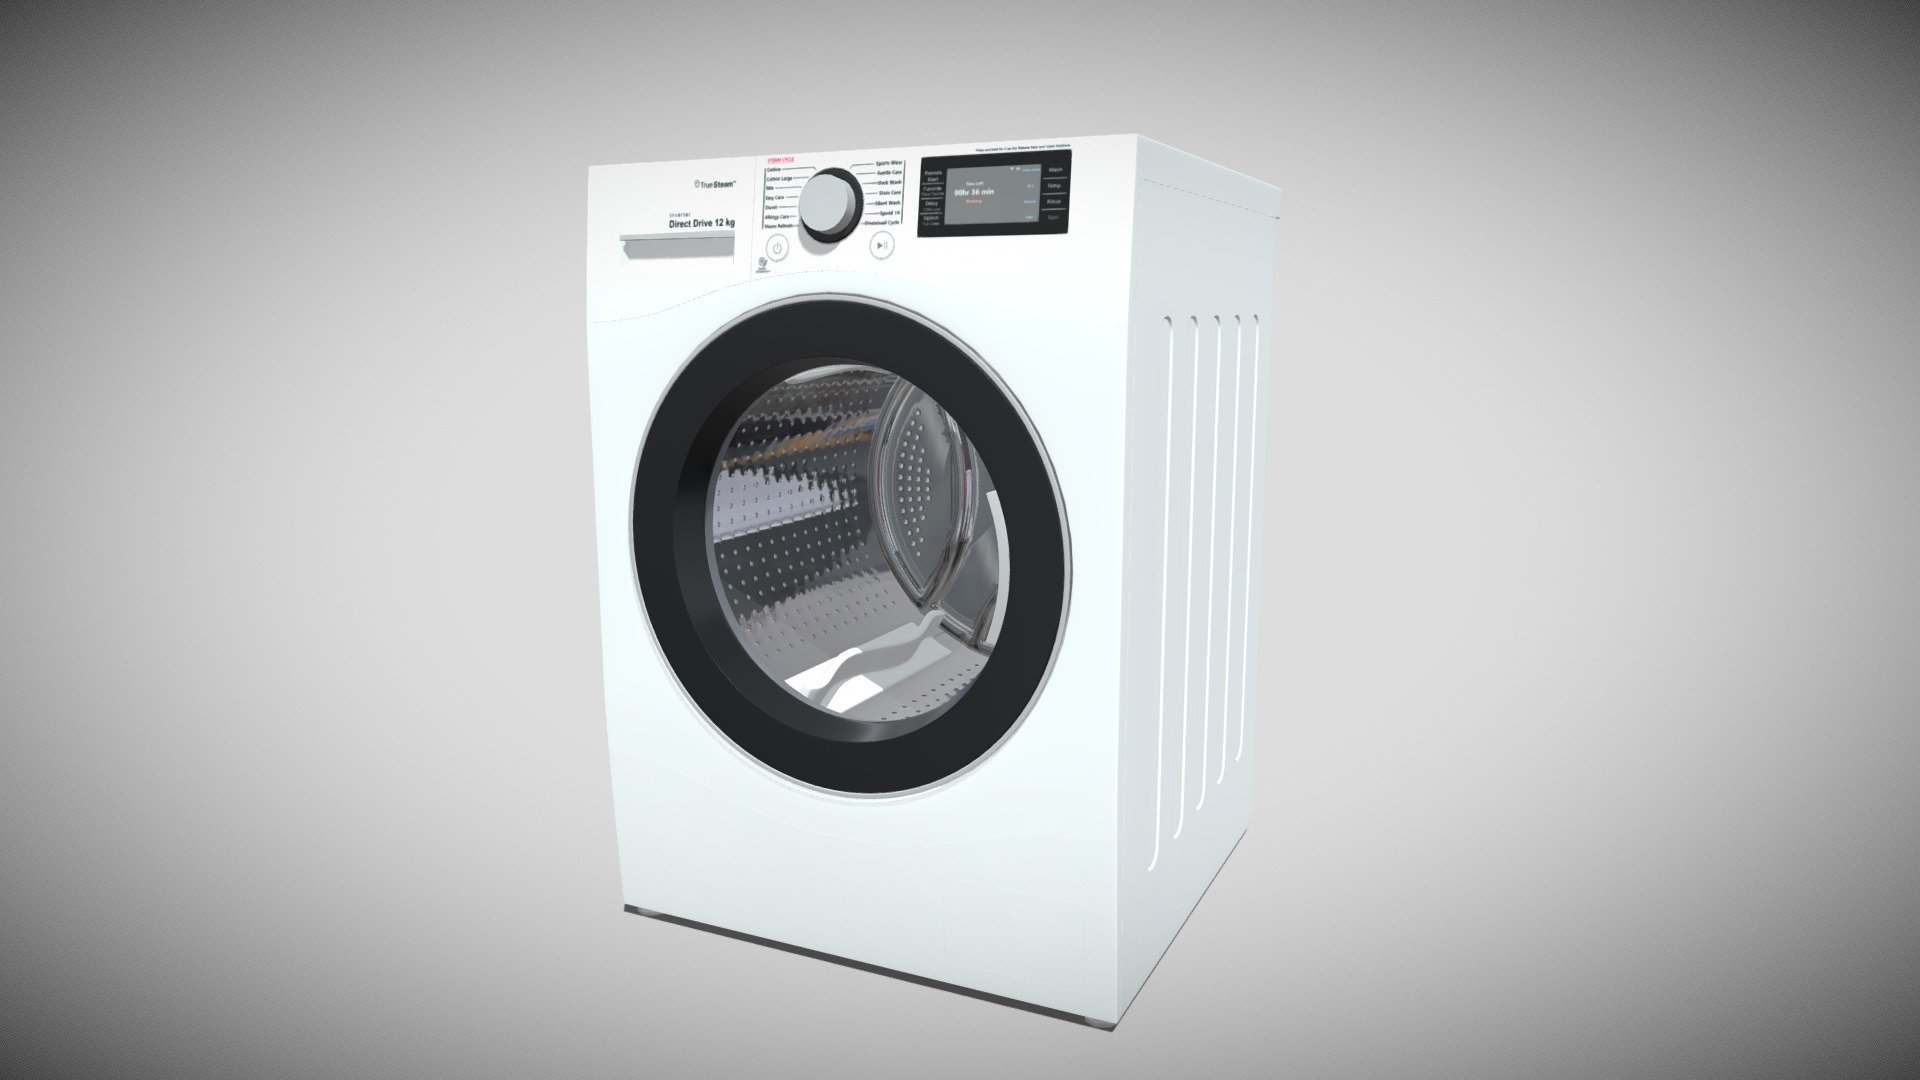 Detailed model of an LG Washer, modeled in Cinema 4D.The model was created using approximate real world dimensions.

The model has 123,440 polys and 127,678 vertices.

An additional file has been provided containing the original Cinema 4D project files with both standard and v-ray materials, textures and other 3d export files such as 3ds, fbx and obj 3d model